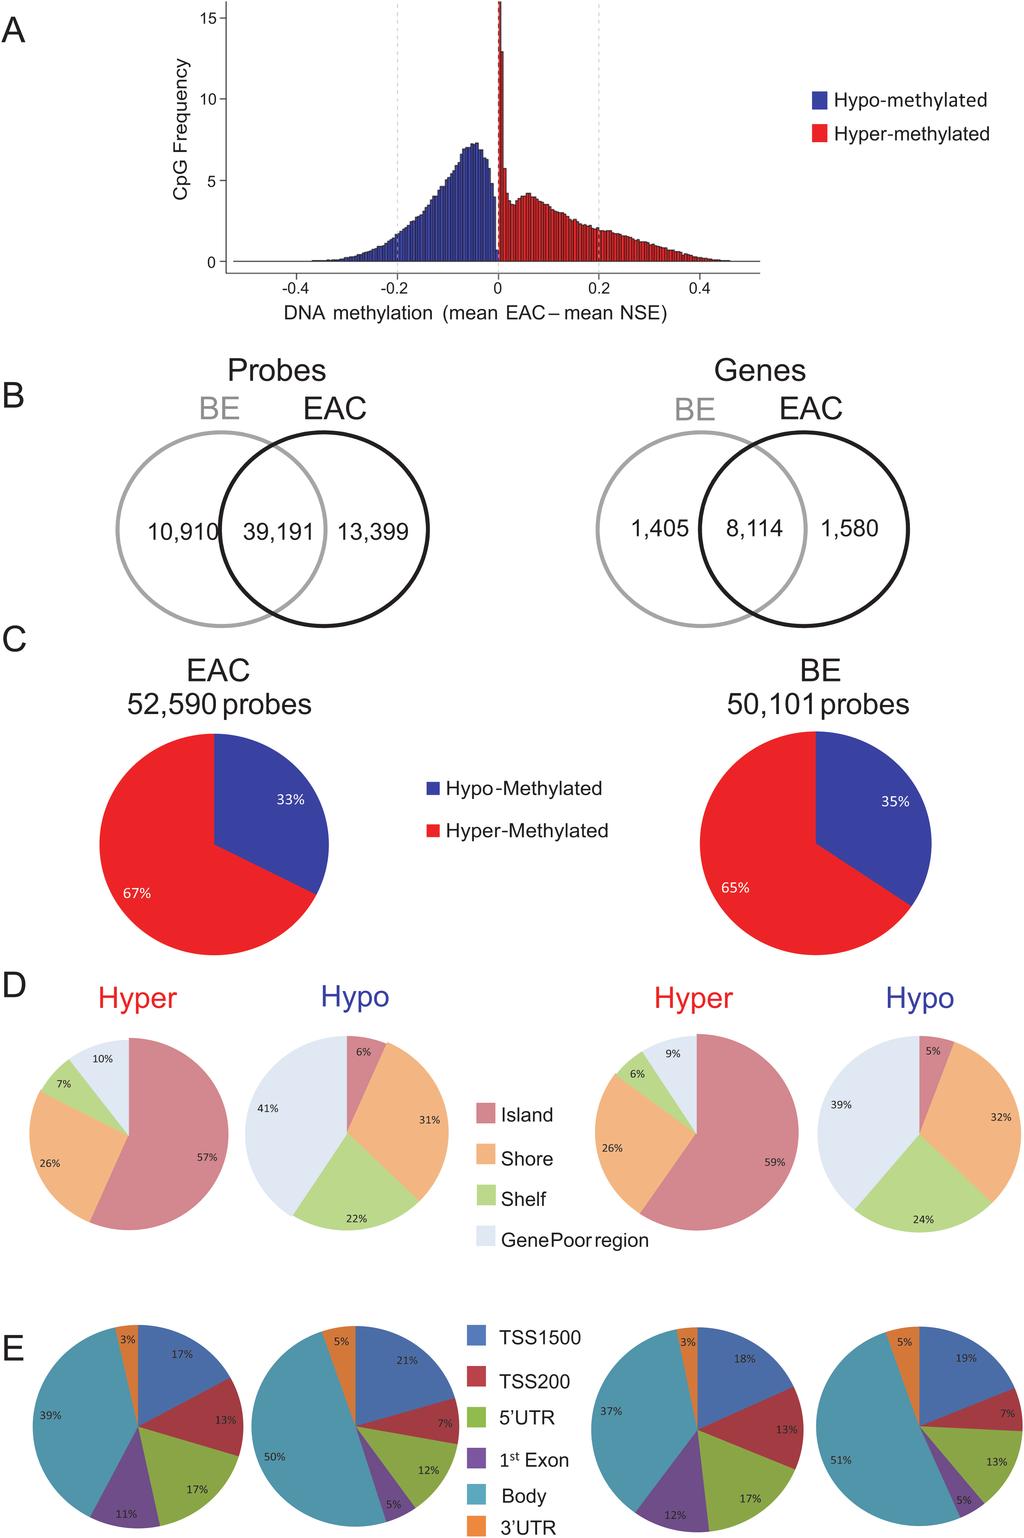 L.Krause et al. 359 Figure 1. Global overview of DNA methylation patterns in BE and EAC. (A) Range of beta value differences of differentially methylated probes (FDR < 0.01) in EAC compared with NSE.